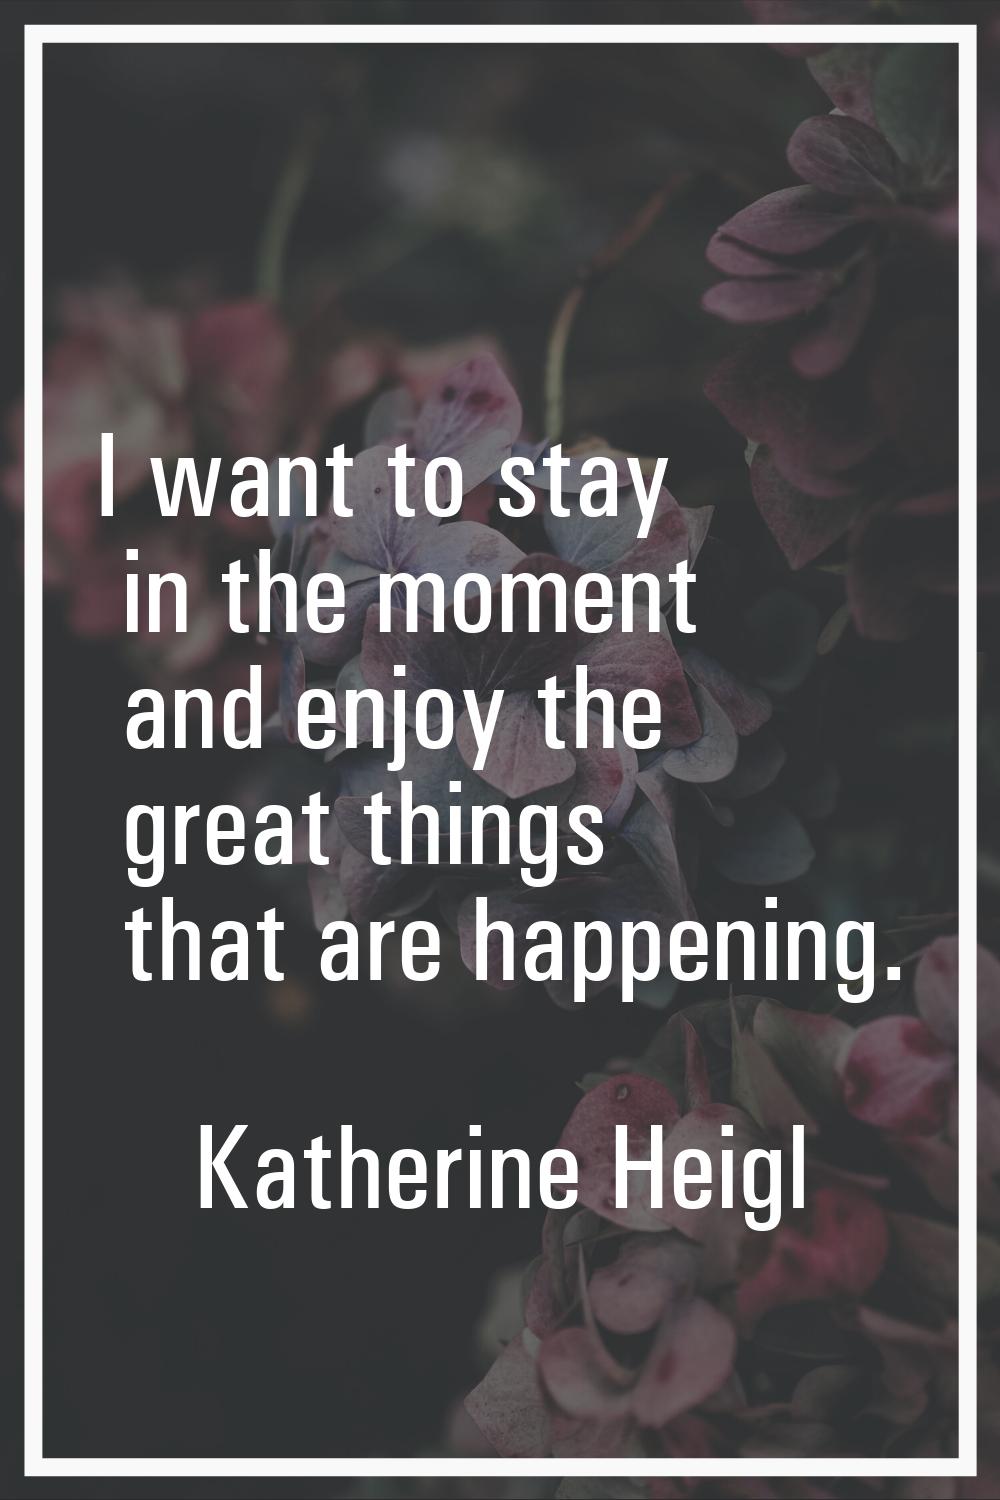 I want to stay in the moment and enjoy the great things that are happening.